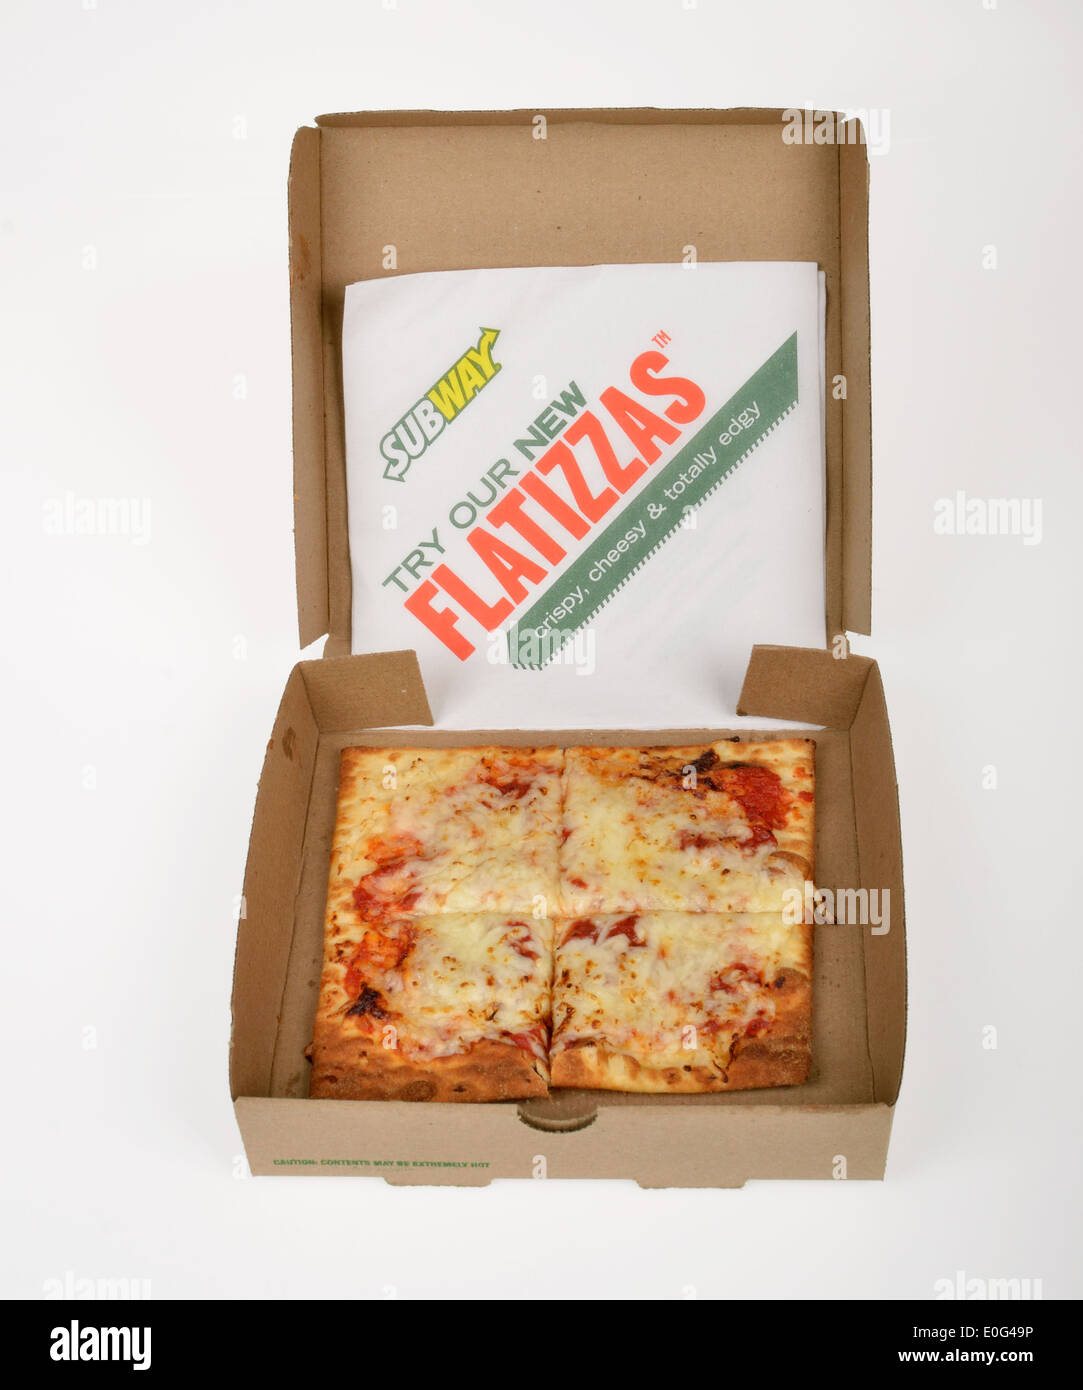 Subway Flatizza cheese square pizza in take out cardboard box with napkin on white background, cutout. usa Stock Photo